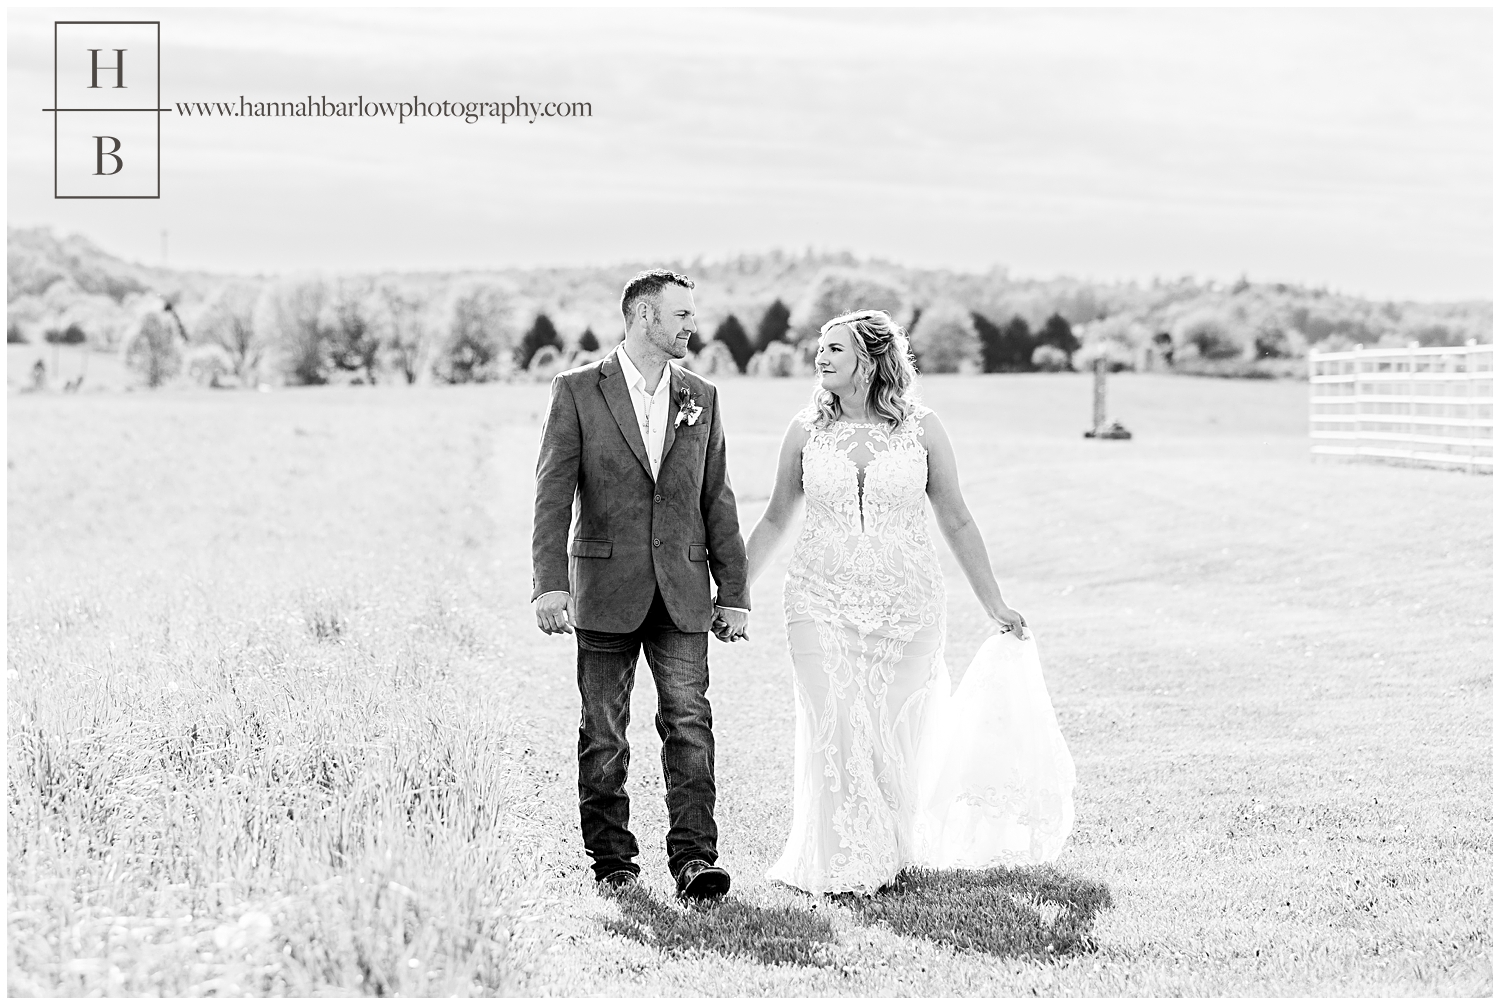 Black and white photo of bride and groom holding hands walking in field.